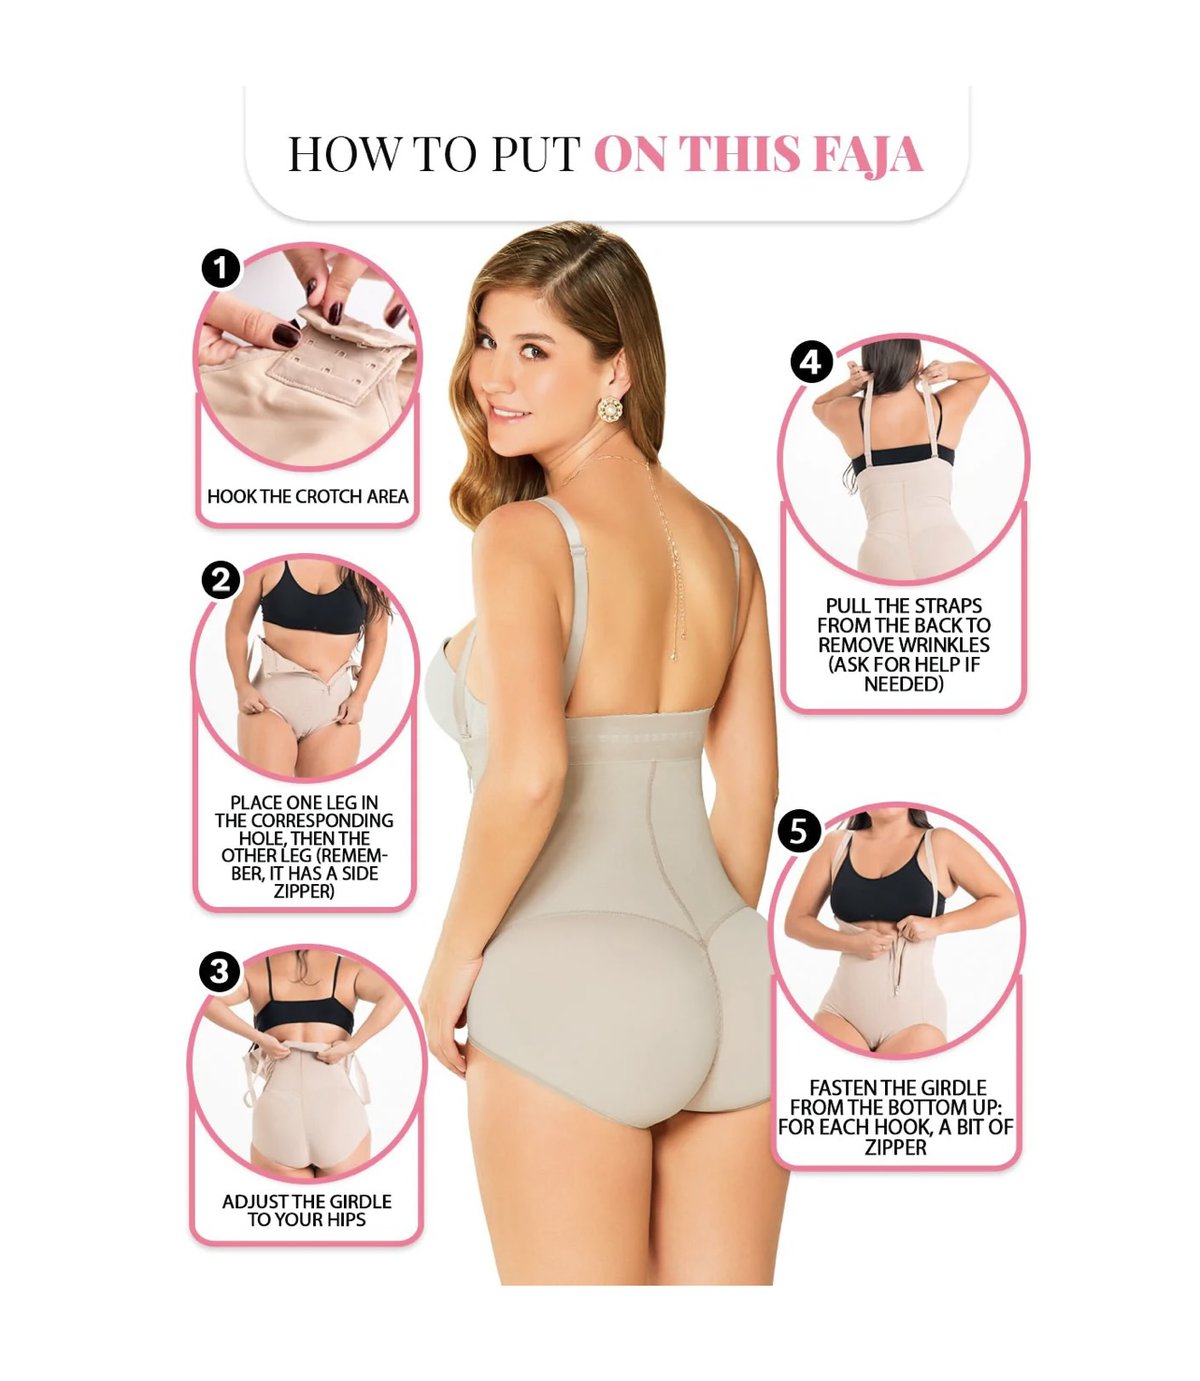 Shapewear & Fajas-Semaless No Zippers No Hooks No Straps Silicone